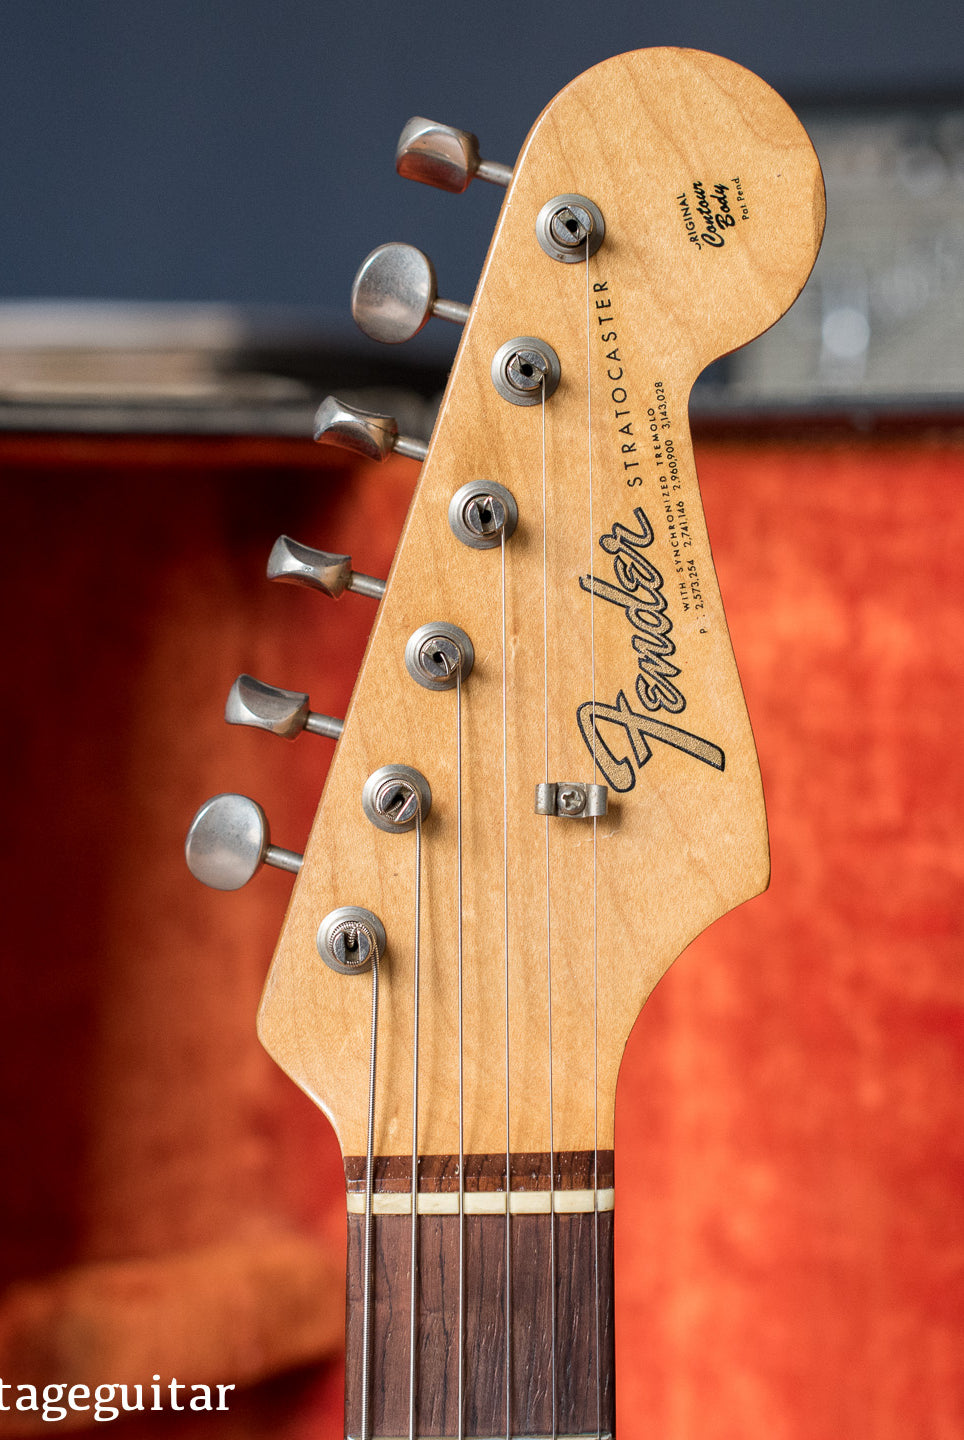 Vintage 1964 Fender Stratocaster factory update from 1954, 1960